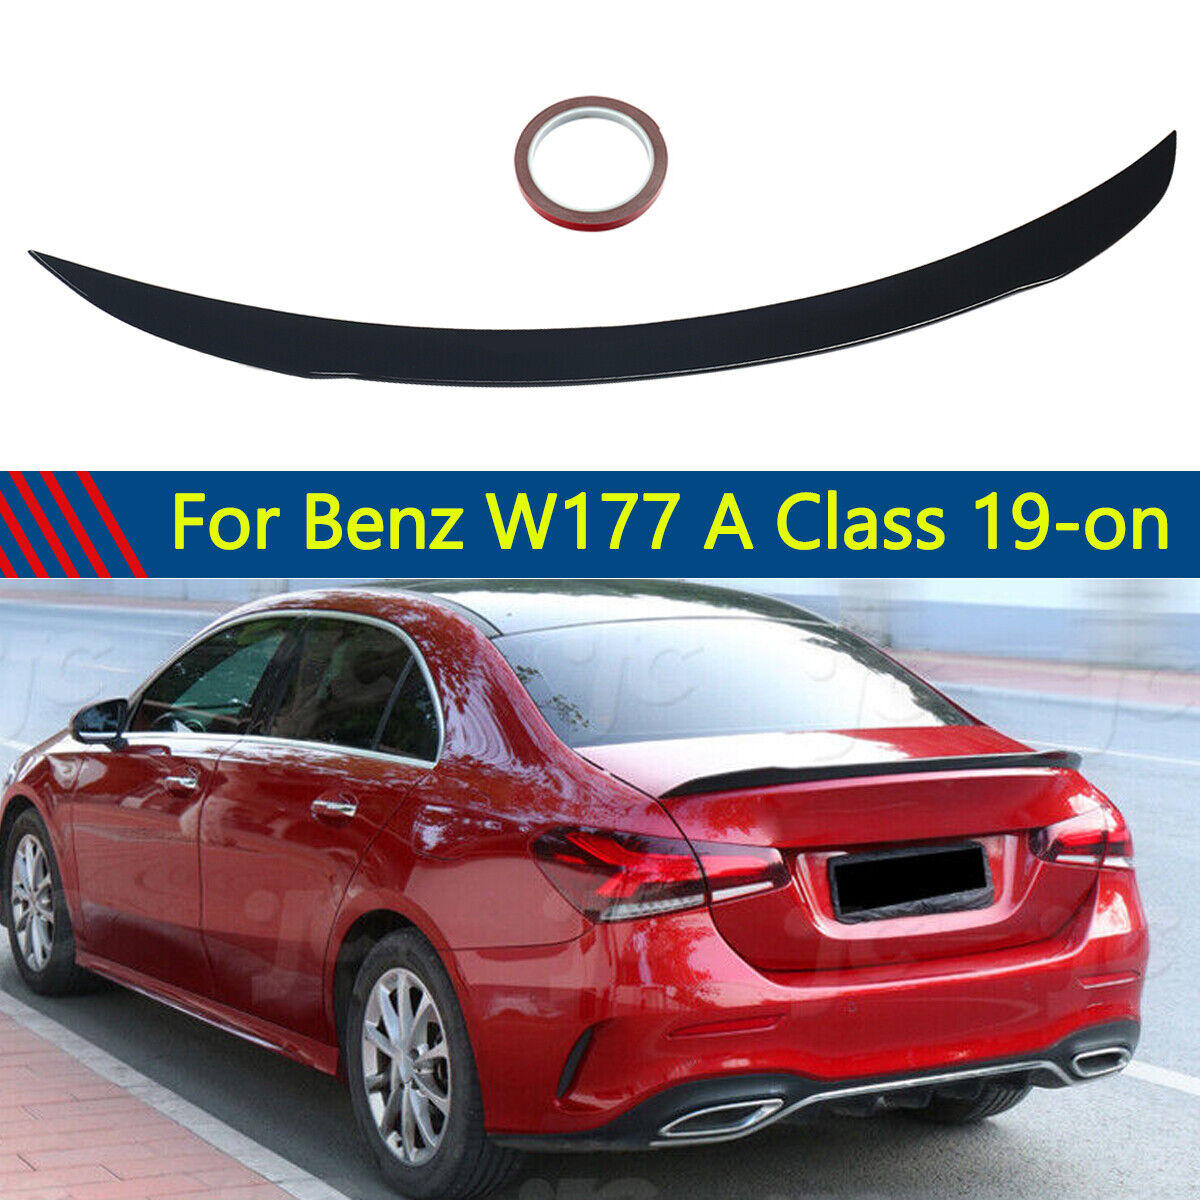 For 2019-on Benz W177 A Class V177 Gloss Black Rear Trunk Spoiler Boot Wing Lid